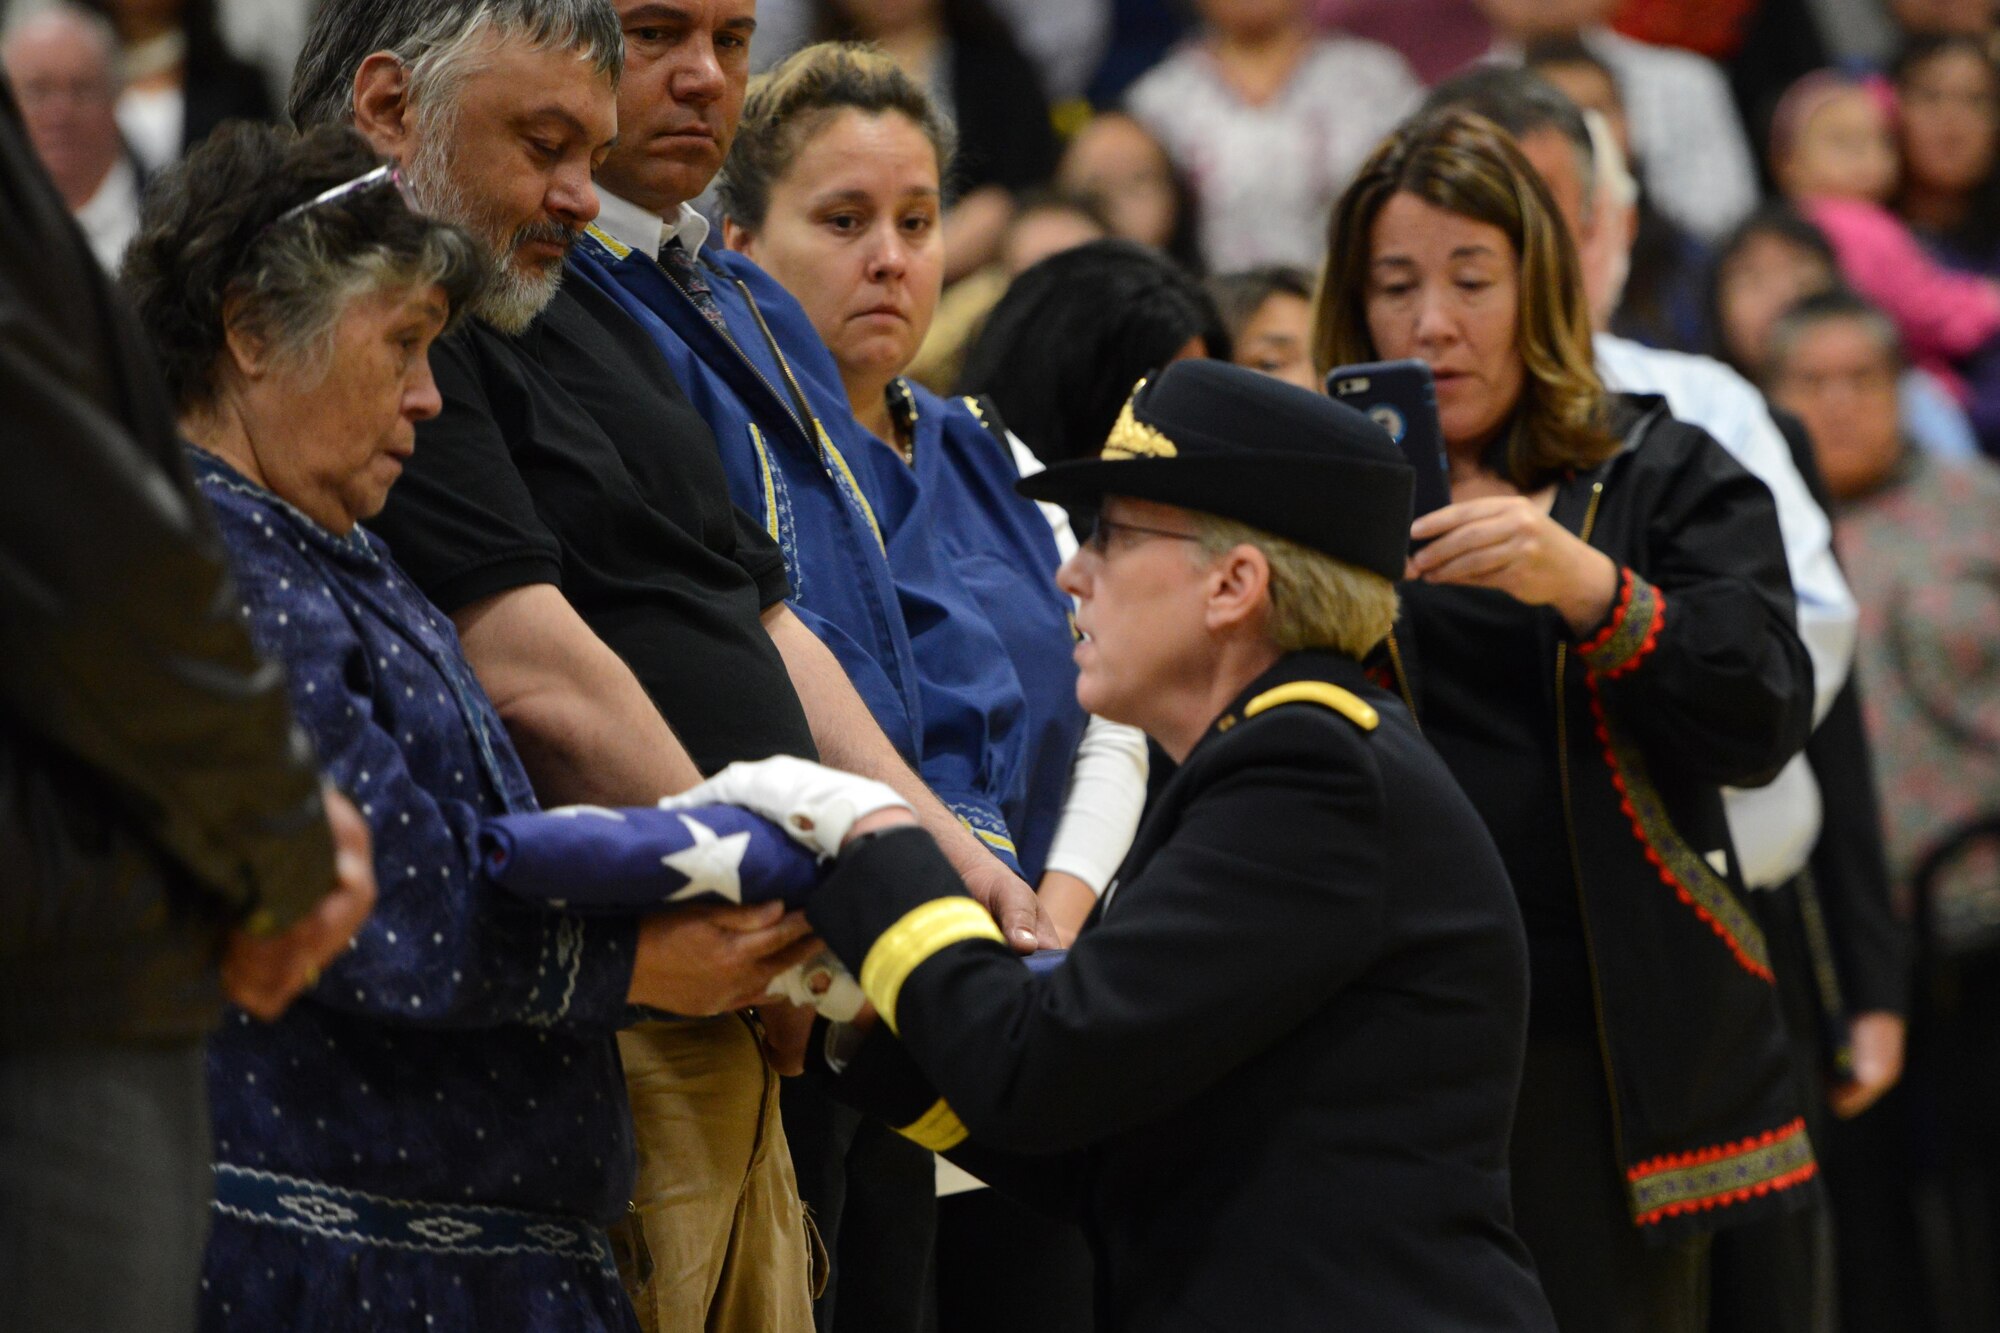 Brig. Gen. Laurie Hummel, Alaska National Guard adjutant general, presents a folded American flag to Mary Schaeffer, wife of former Alaska Adjutant General Maj. Gen. John Schaeffer Jr, during the late general’s memorial service at Kotzebue, Alaska, Aug. 31, 2016. Schaeffer enlisted in the Alaska National Guard in 1957, and served for 34 years.  Schaeffer was the first Alaska Native two-star general of the Alaska National Guard and commissioner of the Alaska Department of Military and Veterans Affairs. He is survived by Mary his wife of 56 years. (U.S. Air Force photo by Airman 1st Class Javier Alvarez)